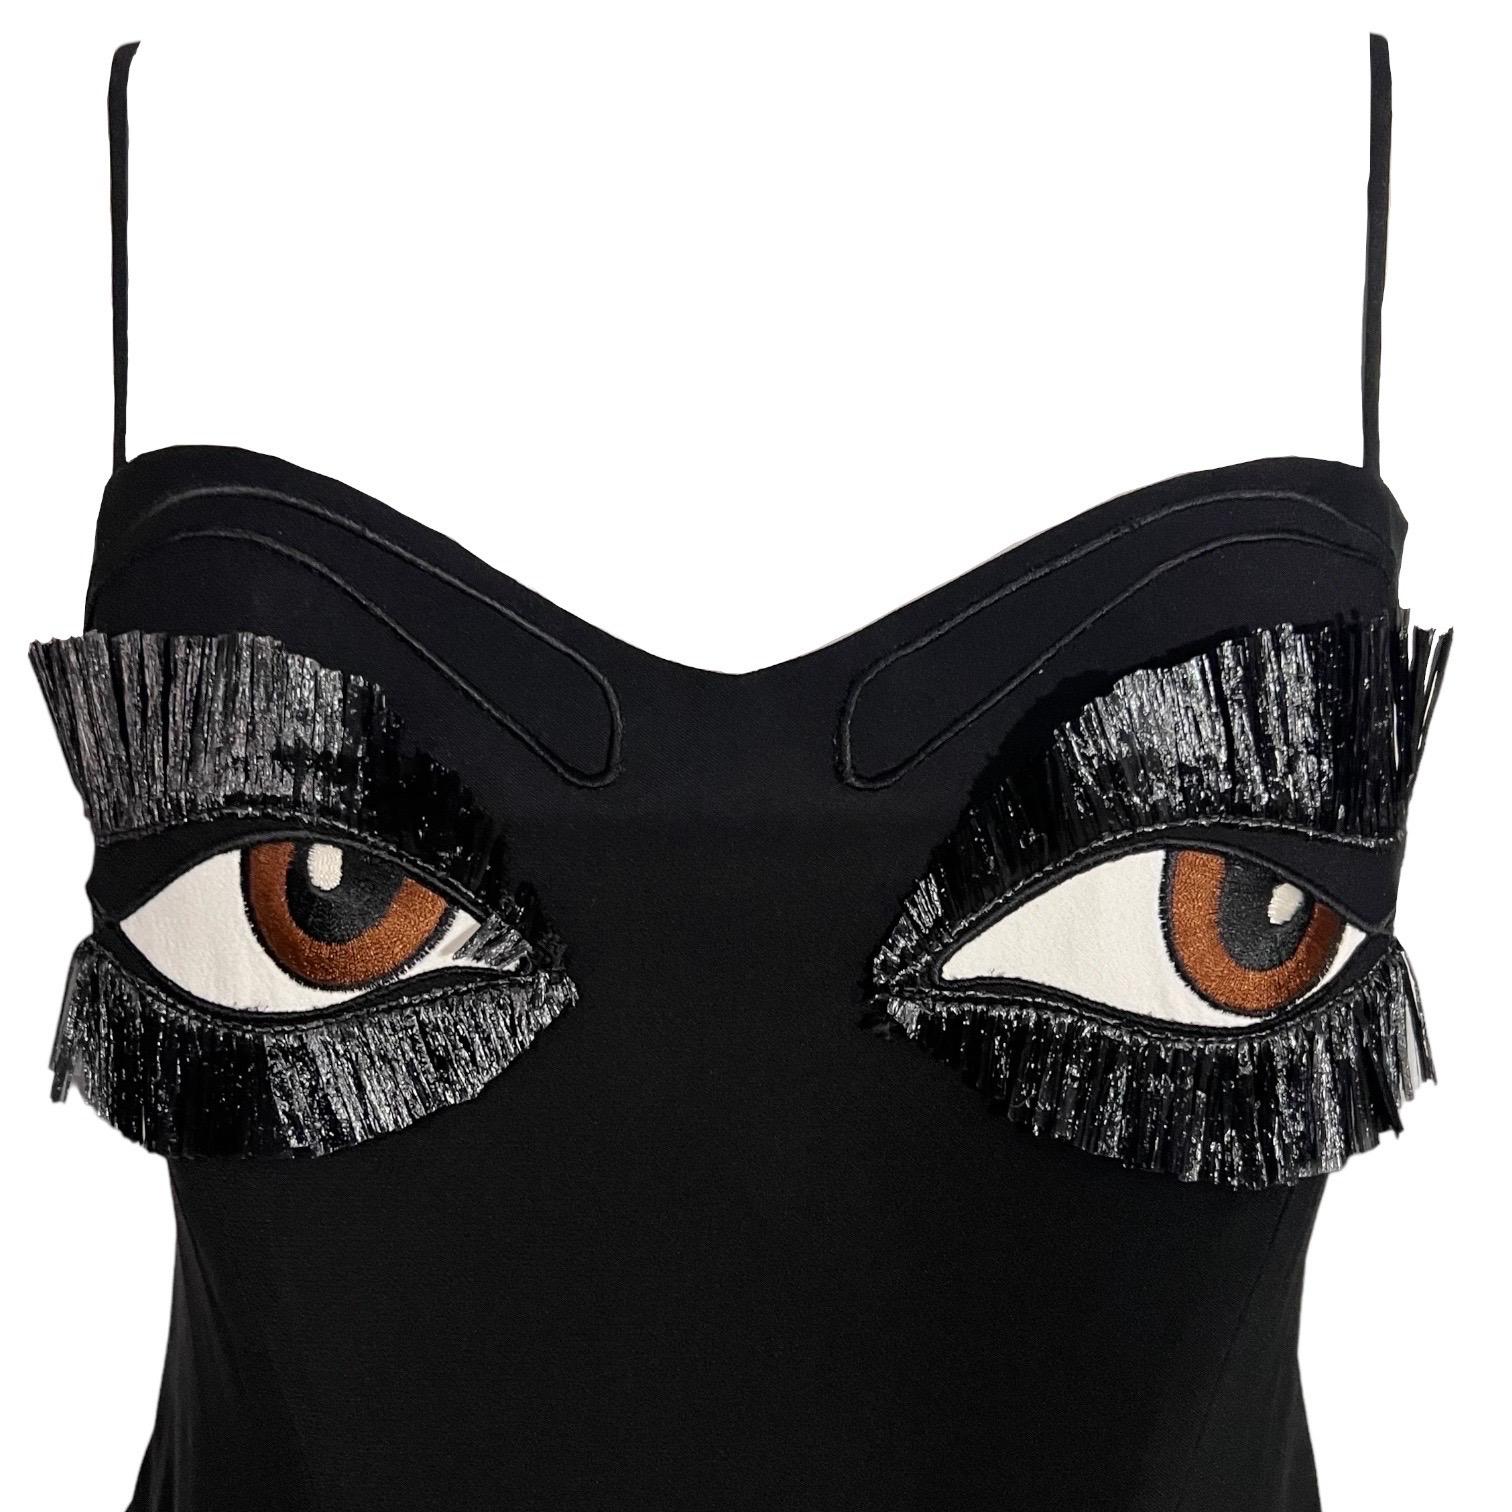 Moschino Couture Vintage rare black bustier top from the Spring Summer 1990 collection. Fun whimsical bustier embroidered with eyes, eyebrows and fringe for eyelashes.
Made in Italy
54% acetate, 46% rayon

Size: US size 8. Refer to the measurements